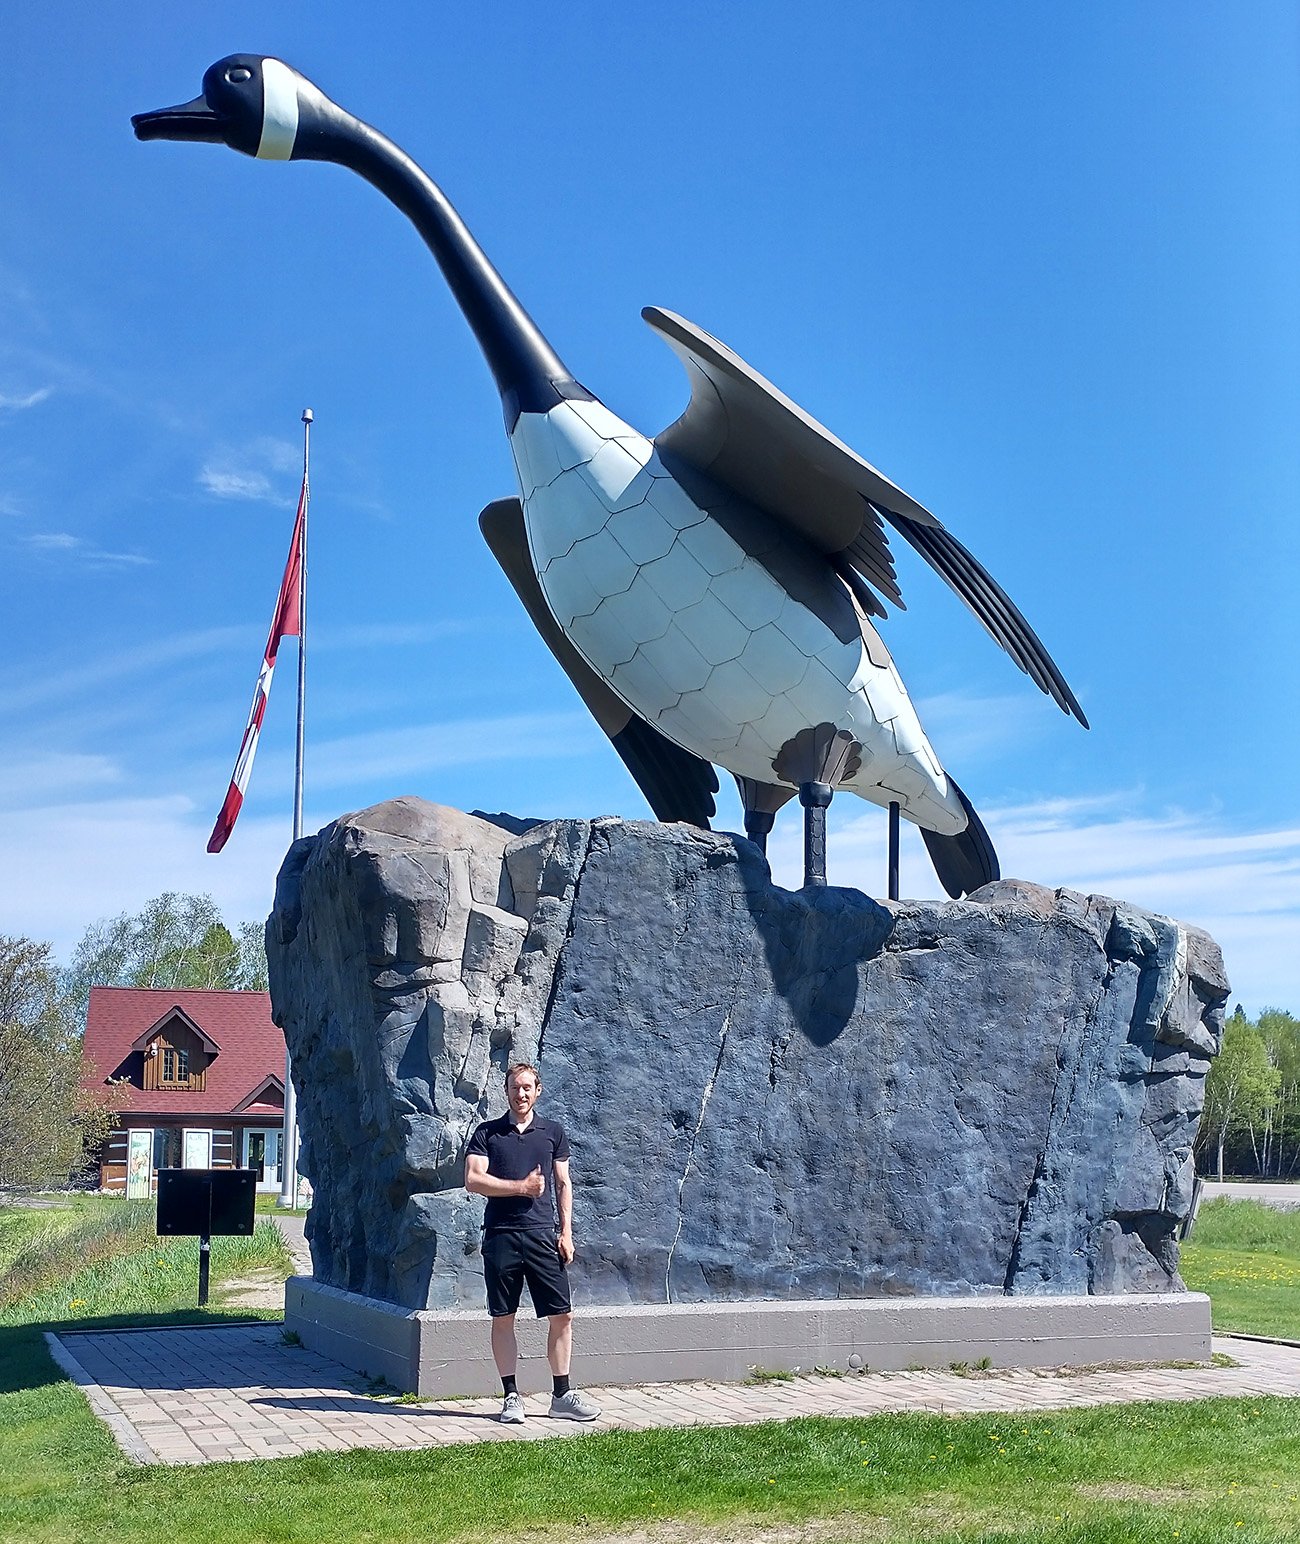 As you continue you will drive near Wawa, home of the world's biggest Canada Goose! No one beating that one.